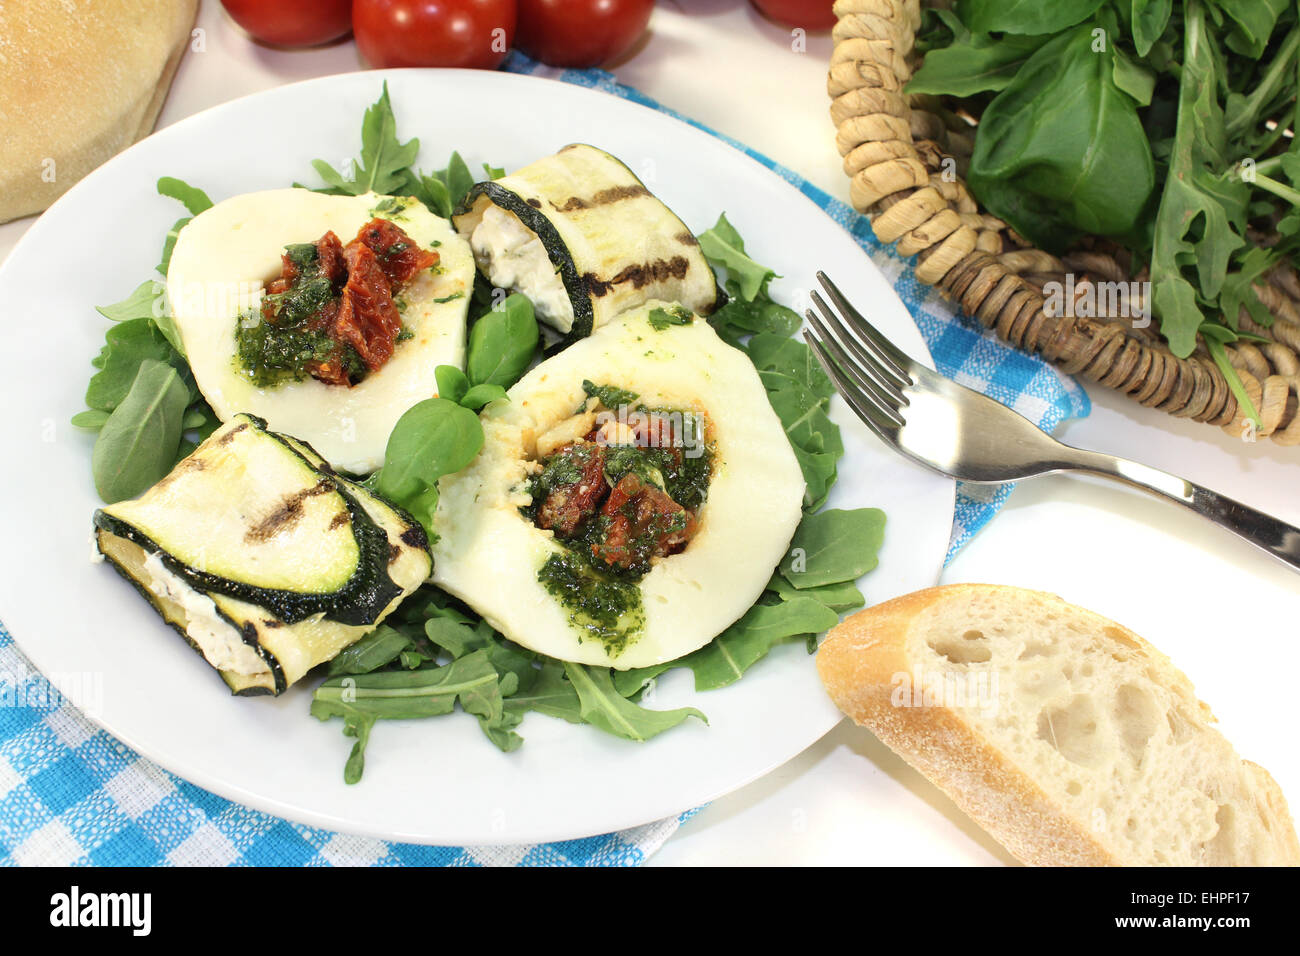 Courgette rolls and filled mozzarella with arugula Stock Photo